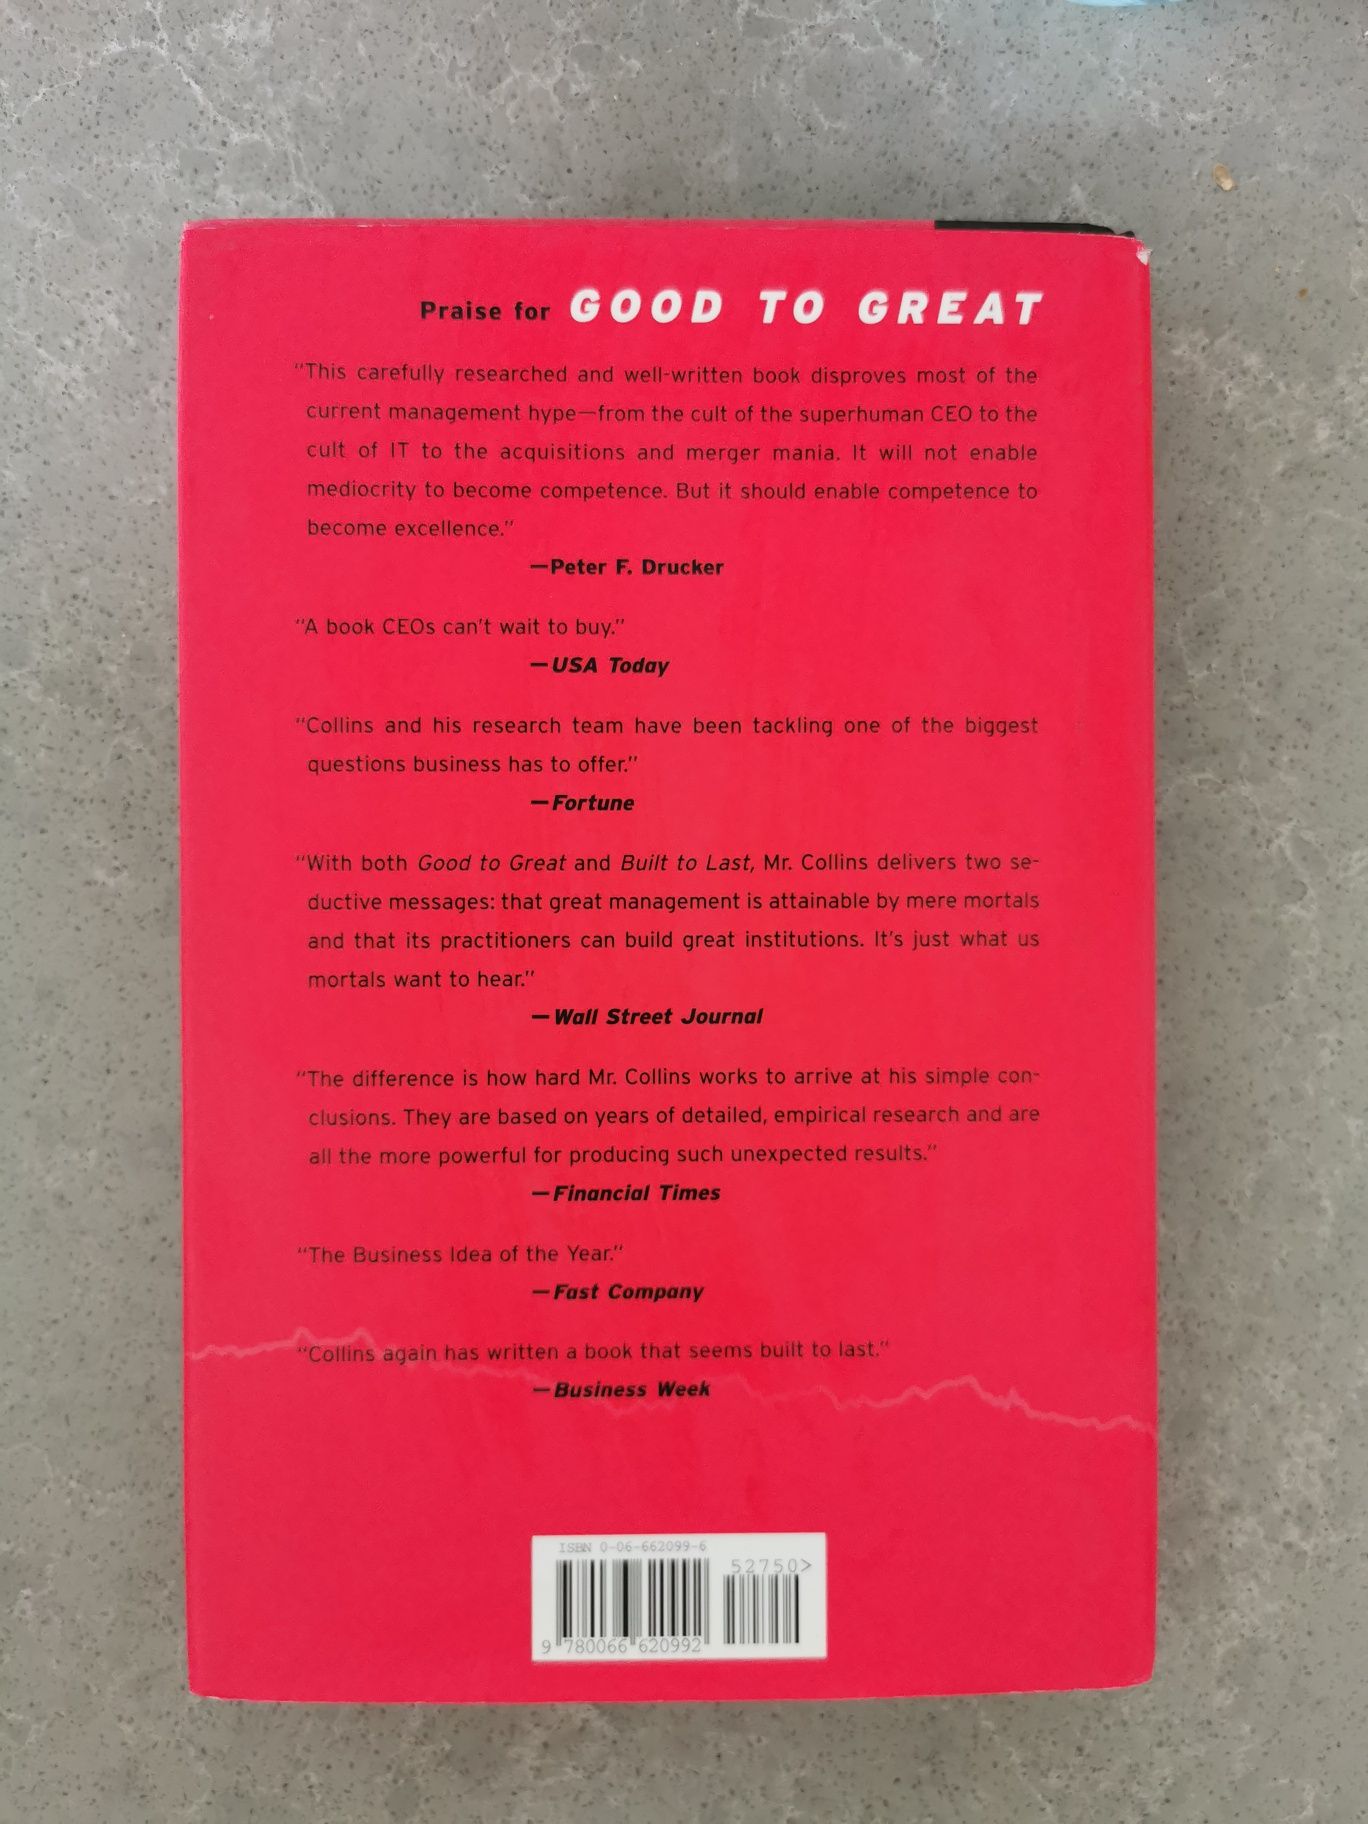 Good to great - Jim Collins